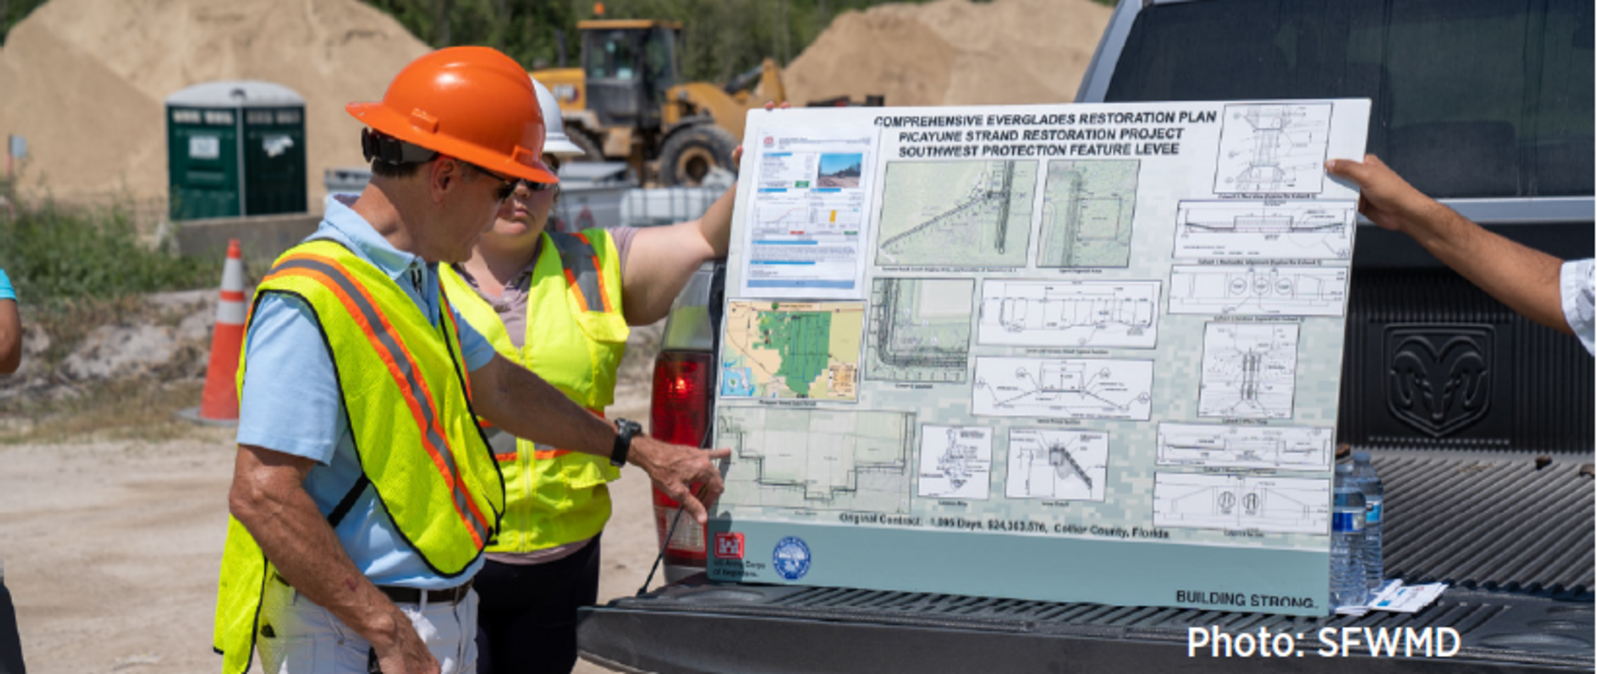 A man in a hardhat and safety vest points to a large map of the CERP in the back of a pickup truck.